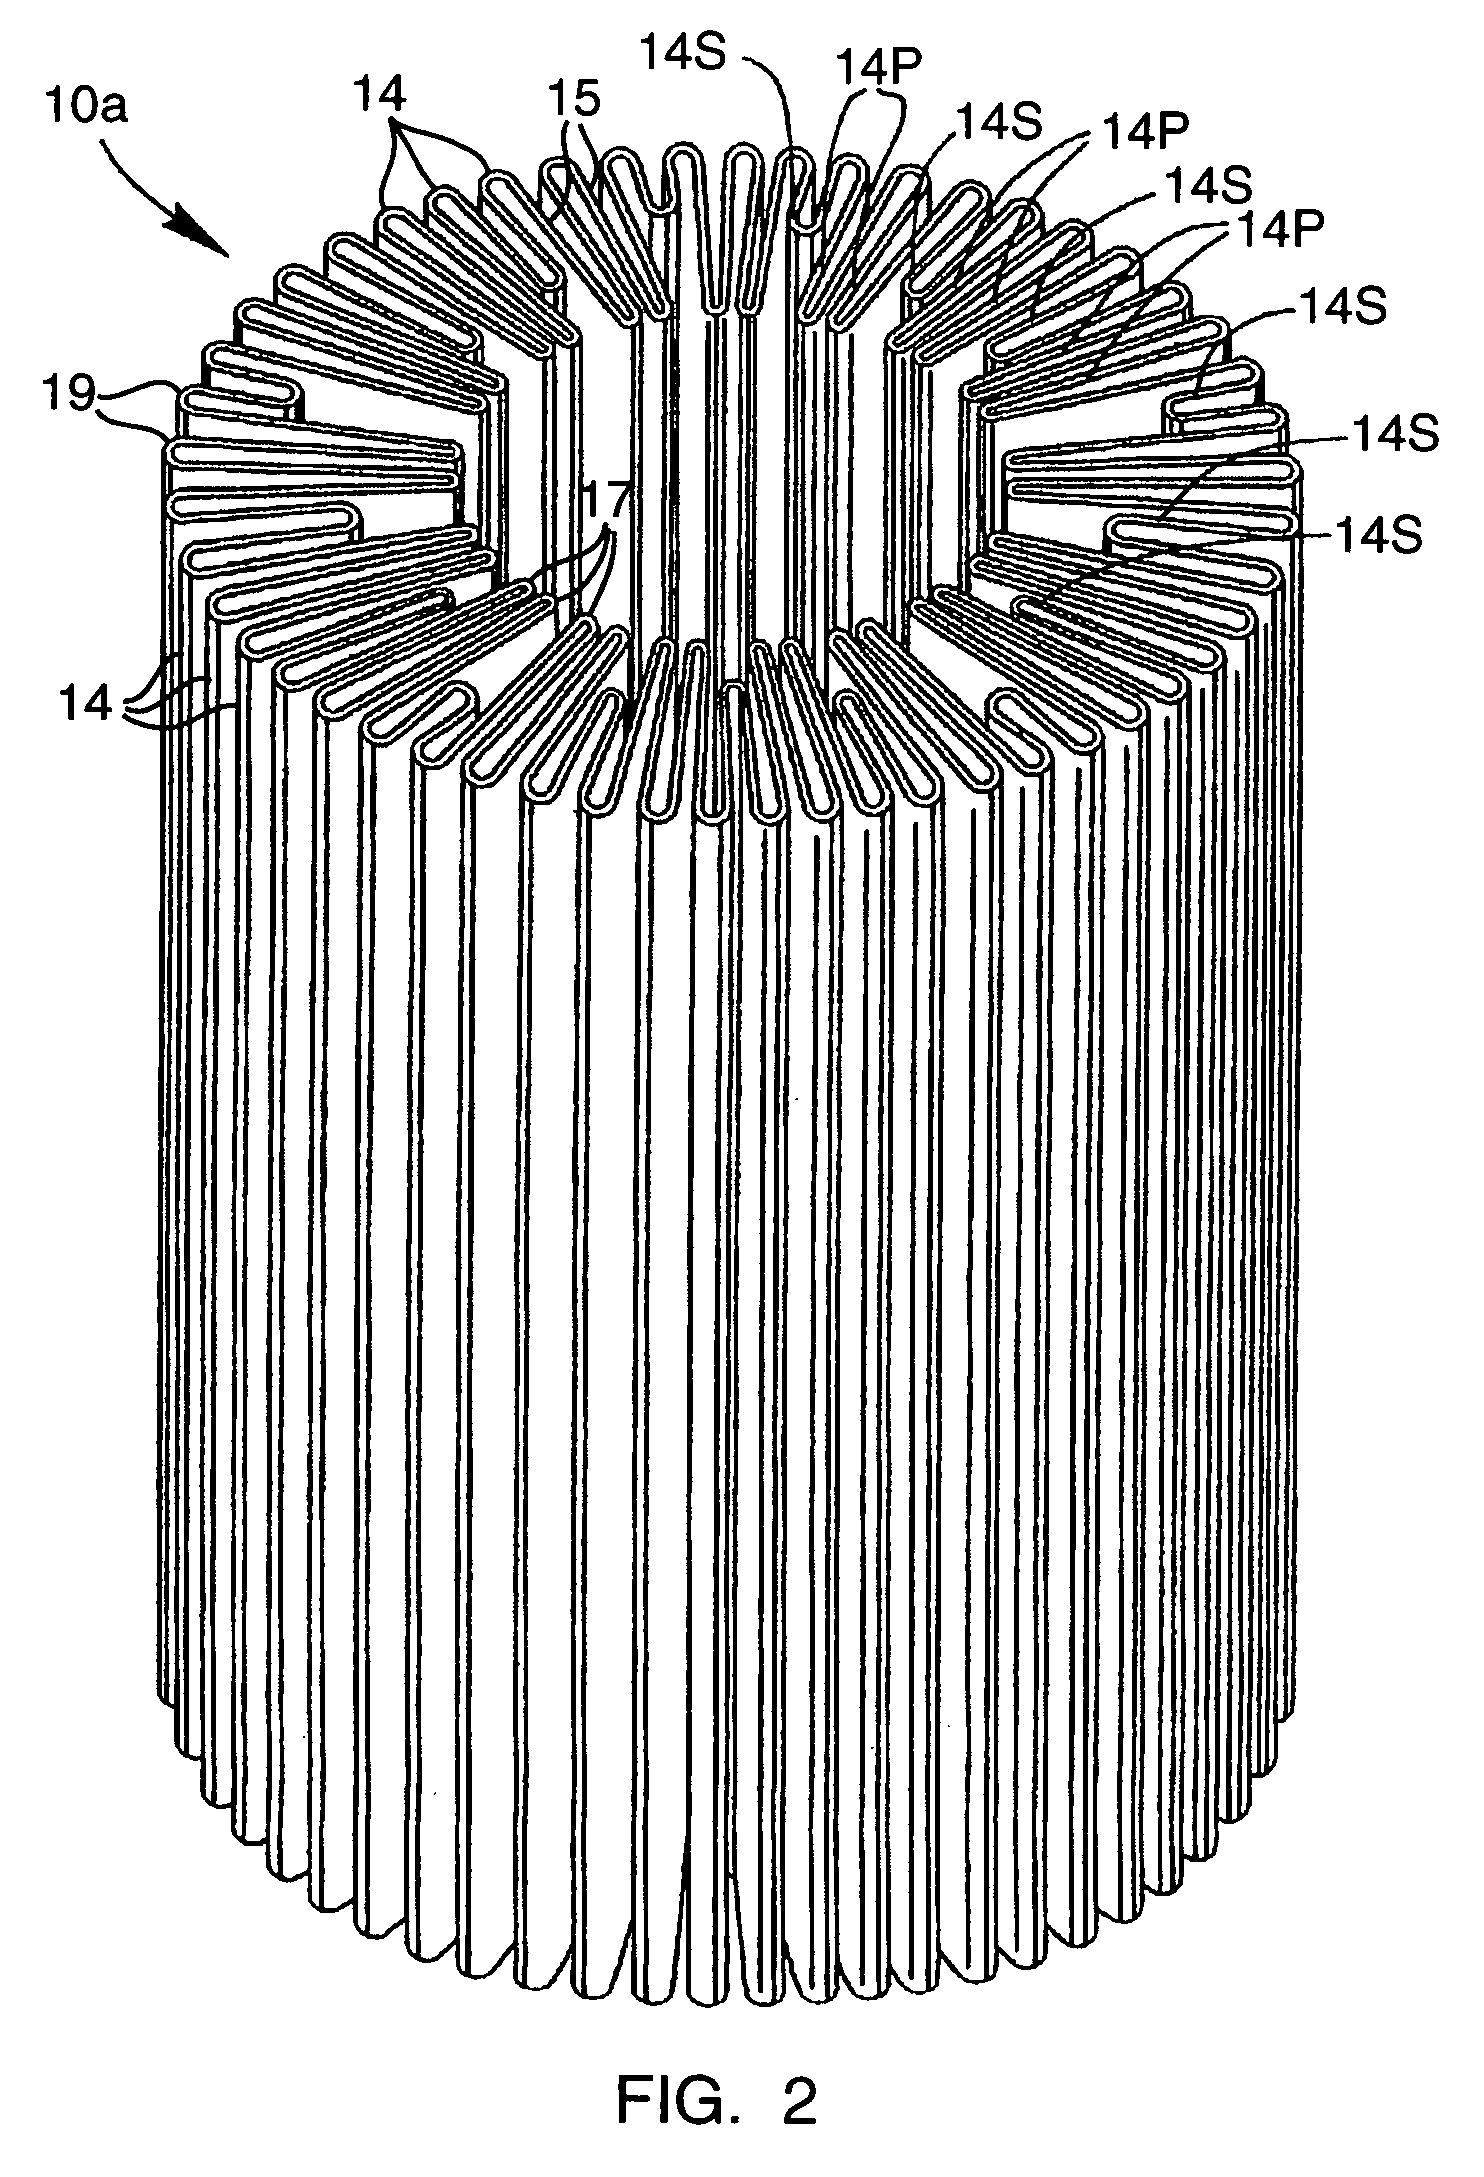 Pleated multi-layer filter media and cartridge